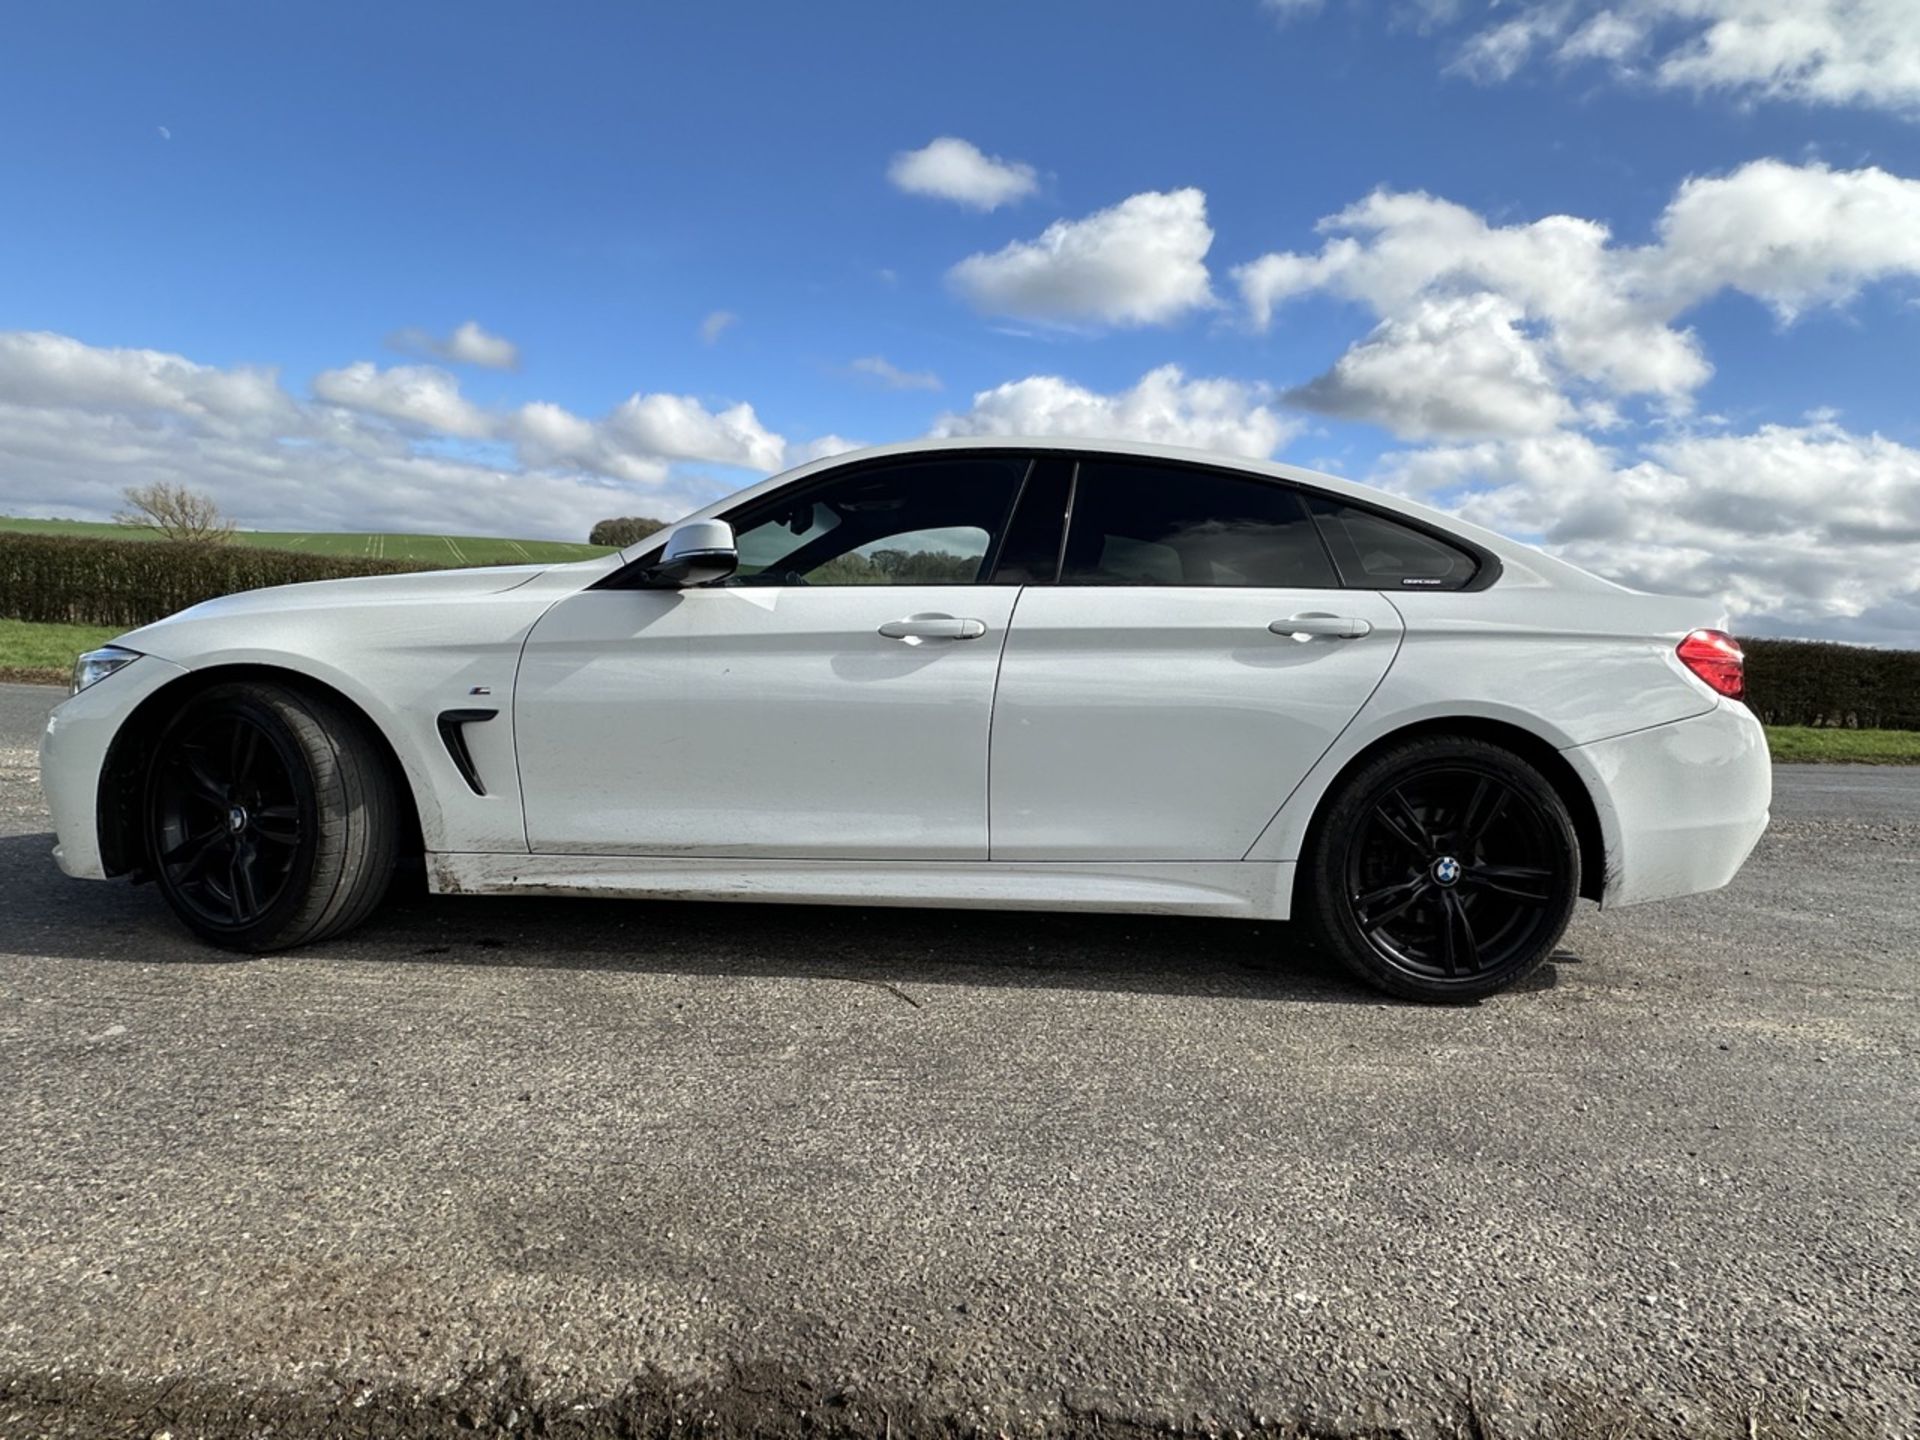 BMW 4 SERIES 420i M Sport 5dr [Professional Media] Manual - Petrol - 2.0 - Coupe- 54k miles - 2016 - Image 5 of 13